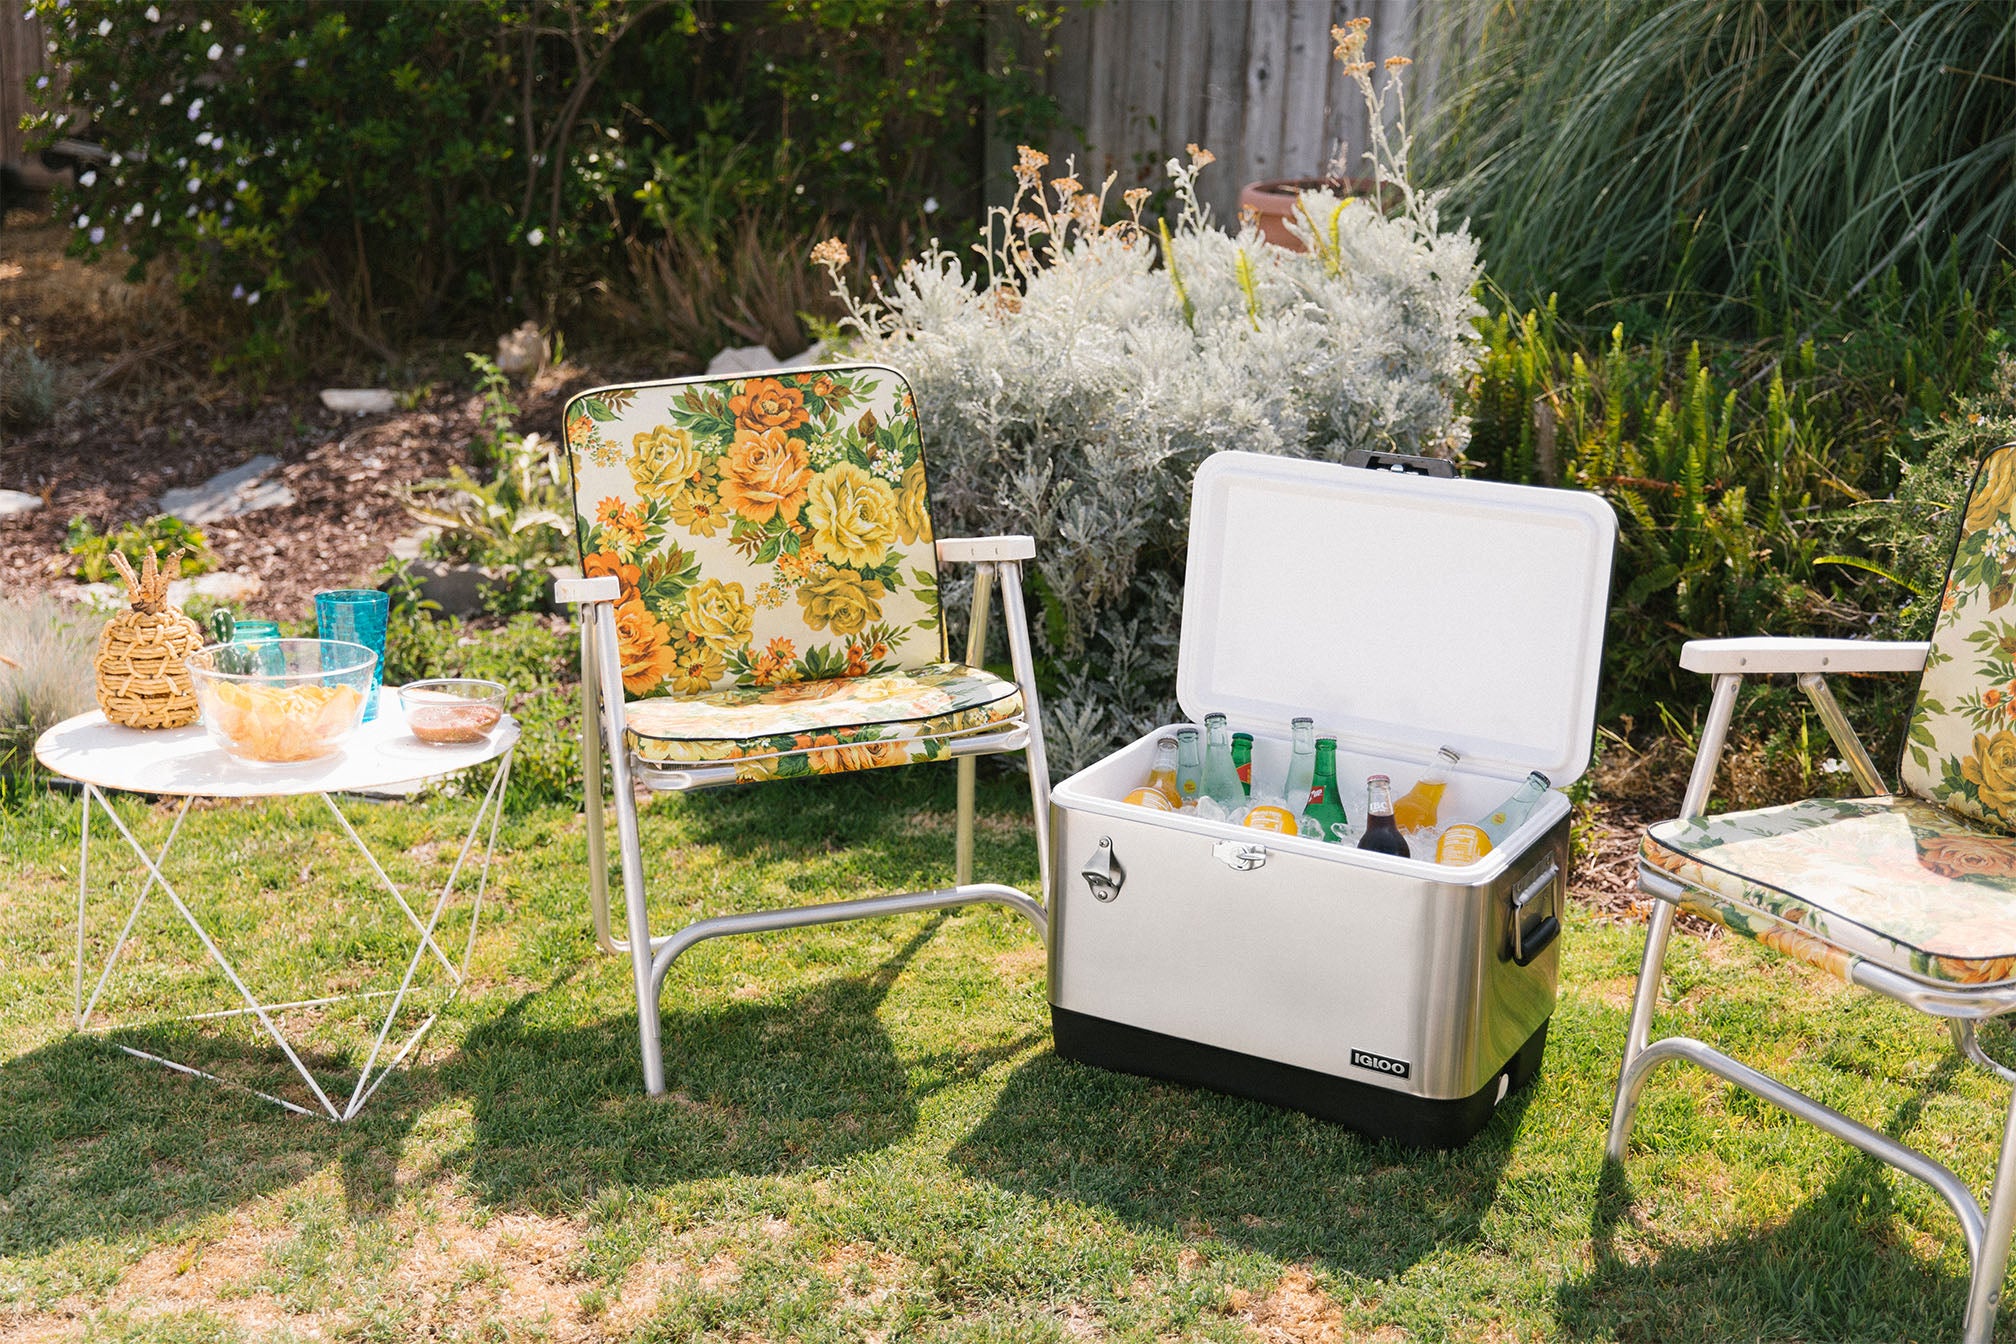 Backyard setting with two chairs and an Igloo Legacy 54 quart cooler filled with drinks.